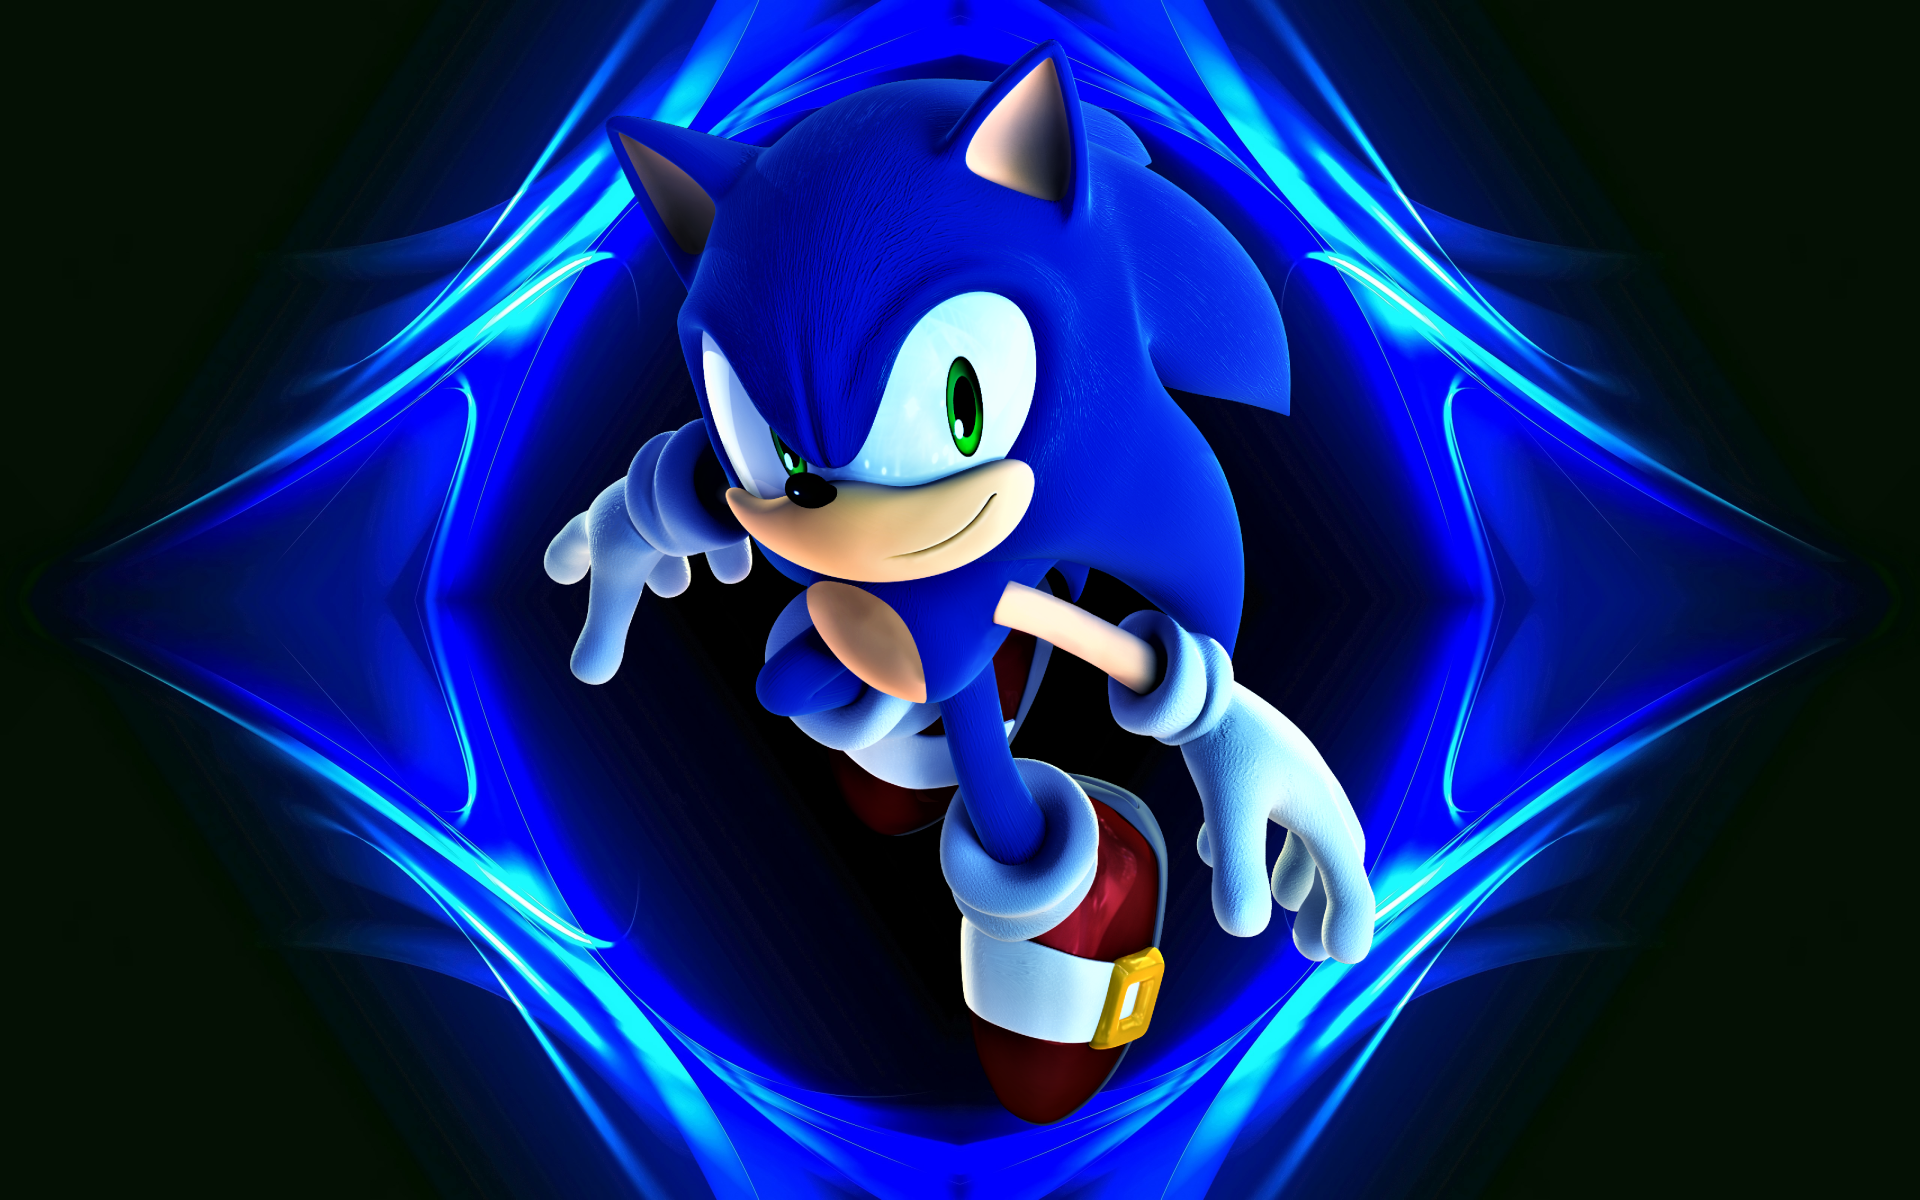 Featured image of post Sonic Wallpaper 4K Png / Download the image in uhd 4k 3840x2160, full hd 1920x1080 sizes for macbook and desktop backgrounds or in vertical hd sizes for android phones and iphone 6, 7, 8, x.